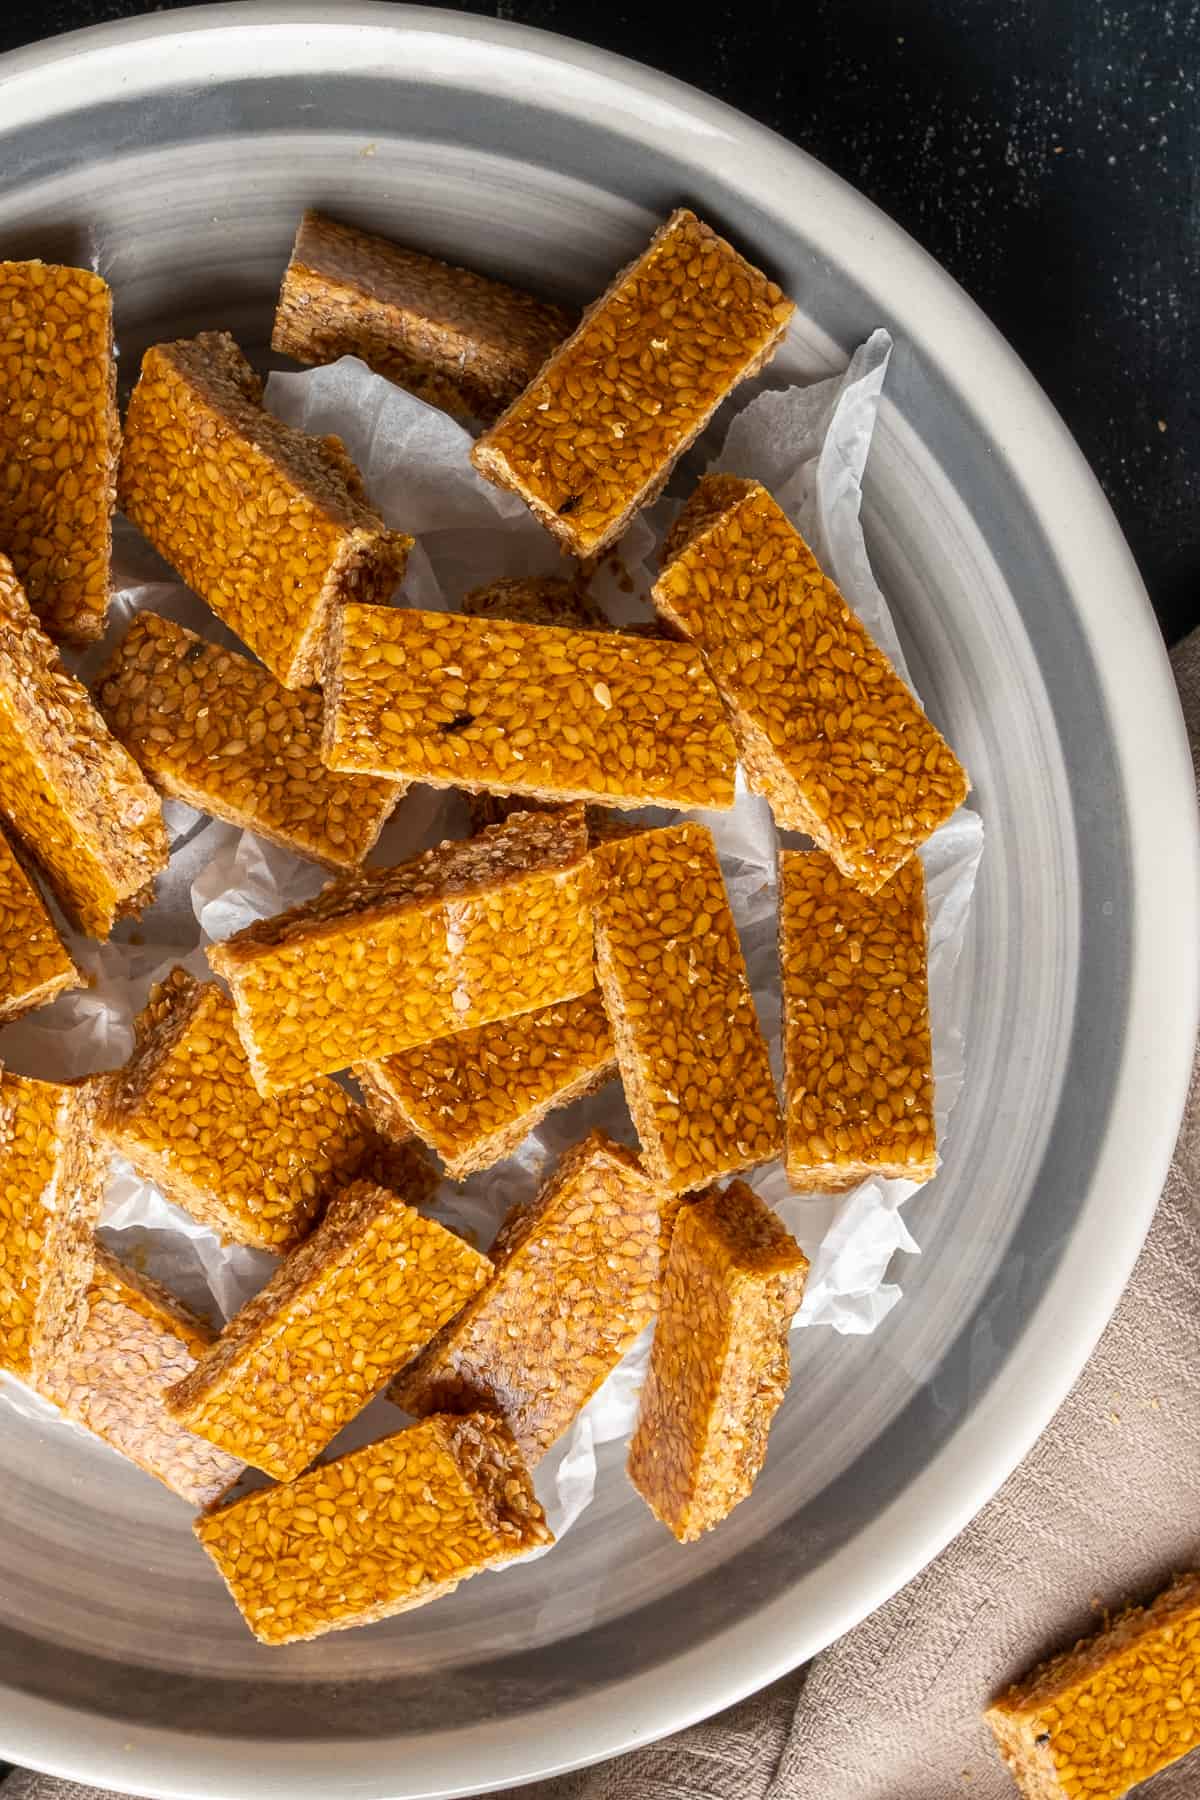 Sesame seed candies in small rectangular shape in a white bowl.